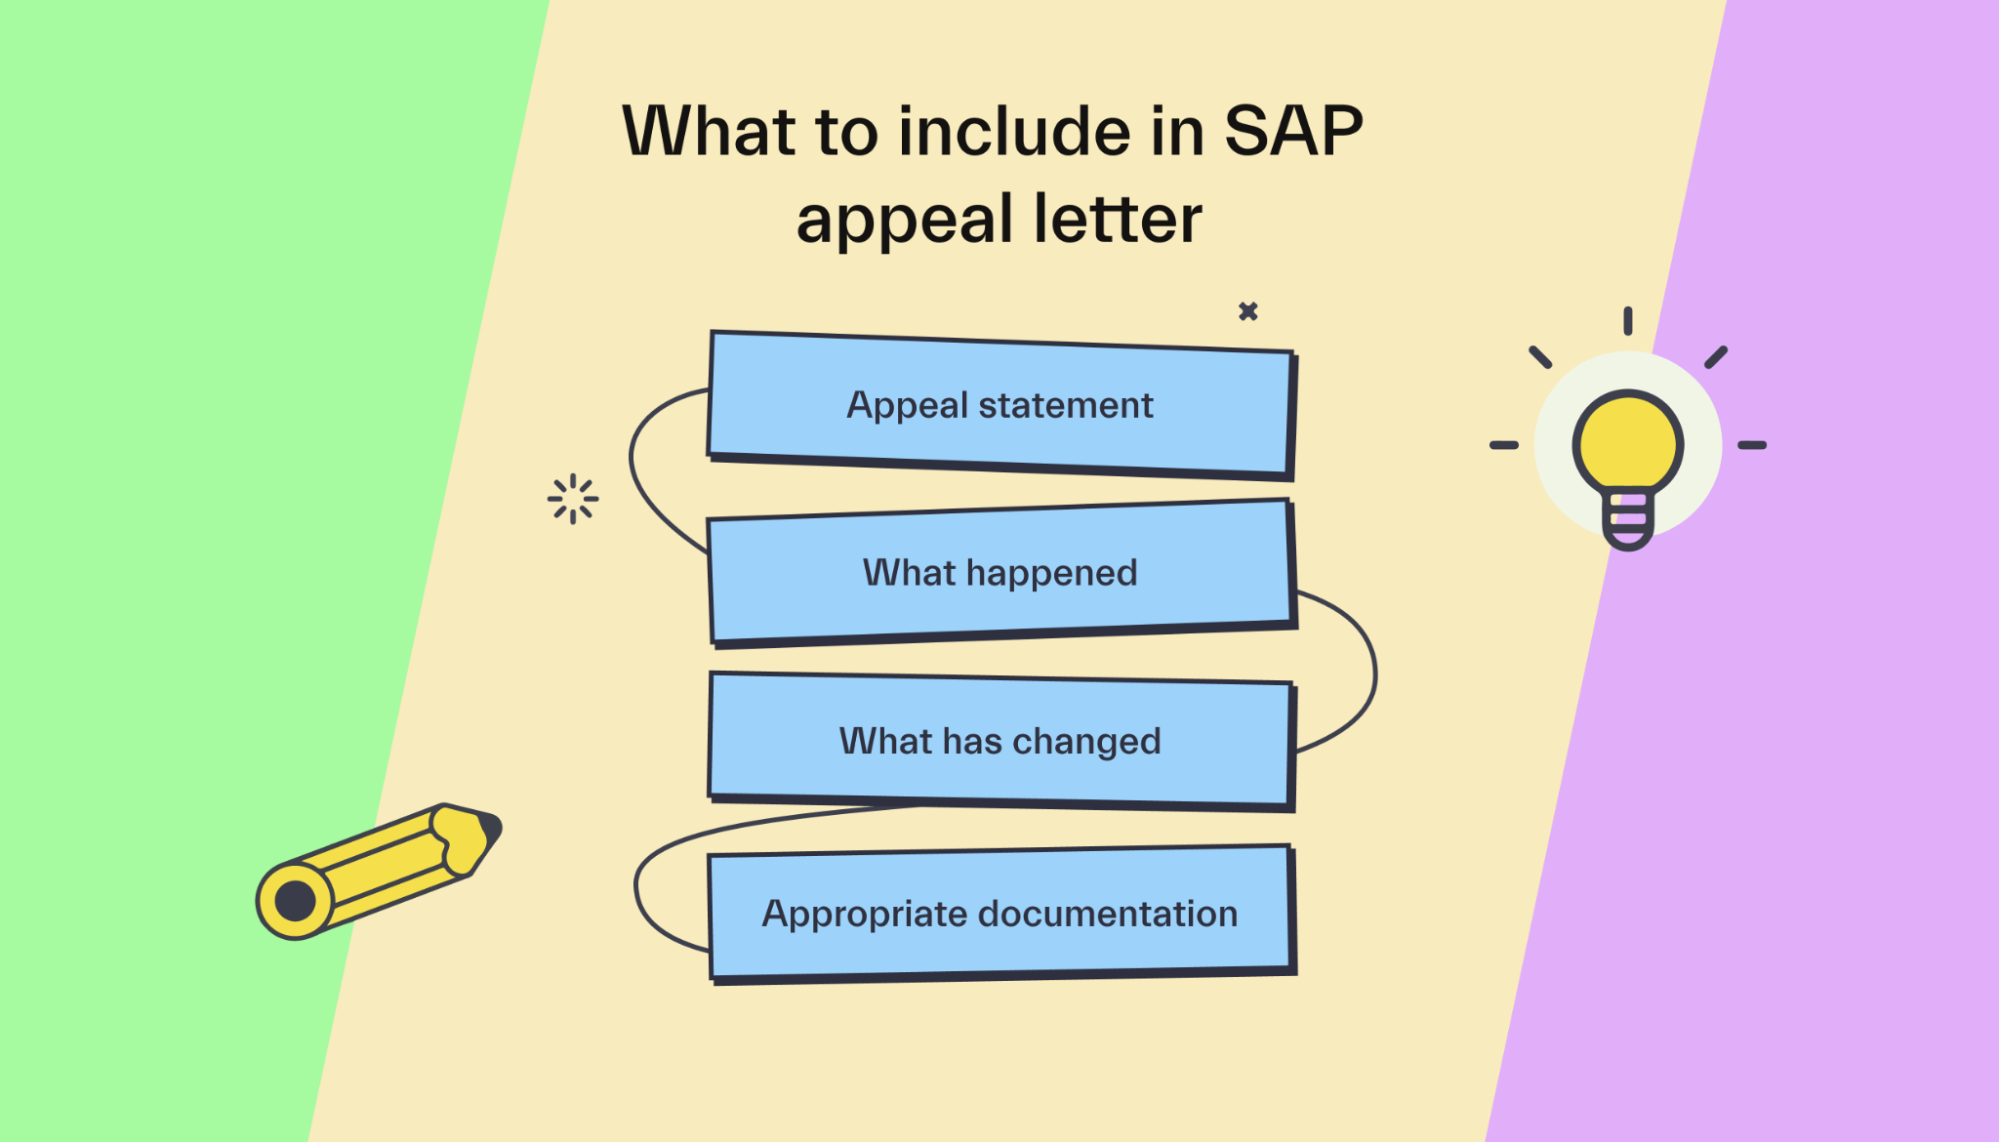 What to include in SAP appeal letter